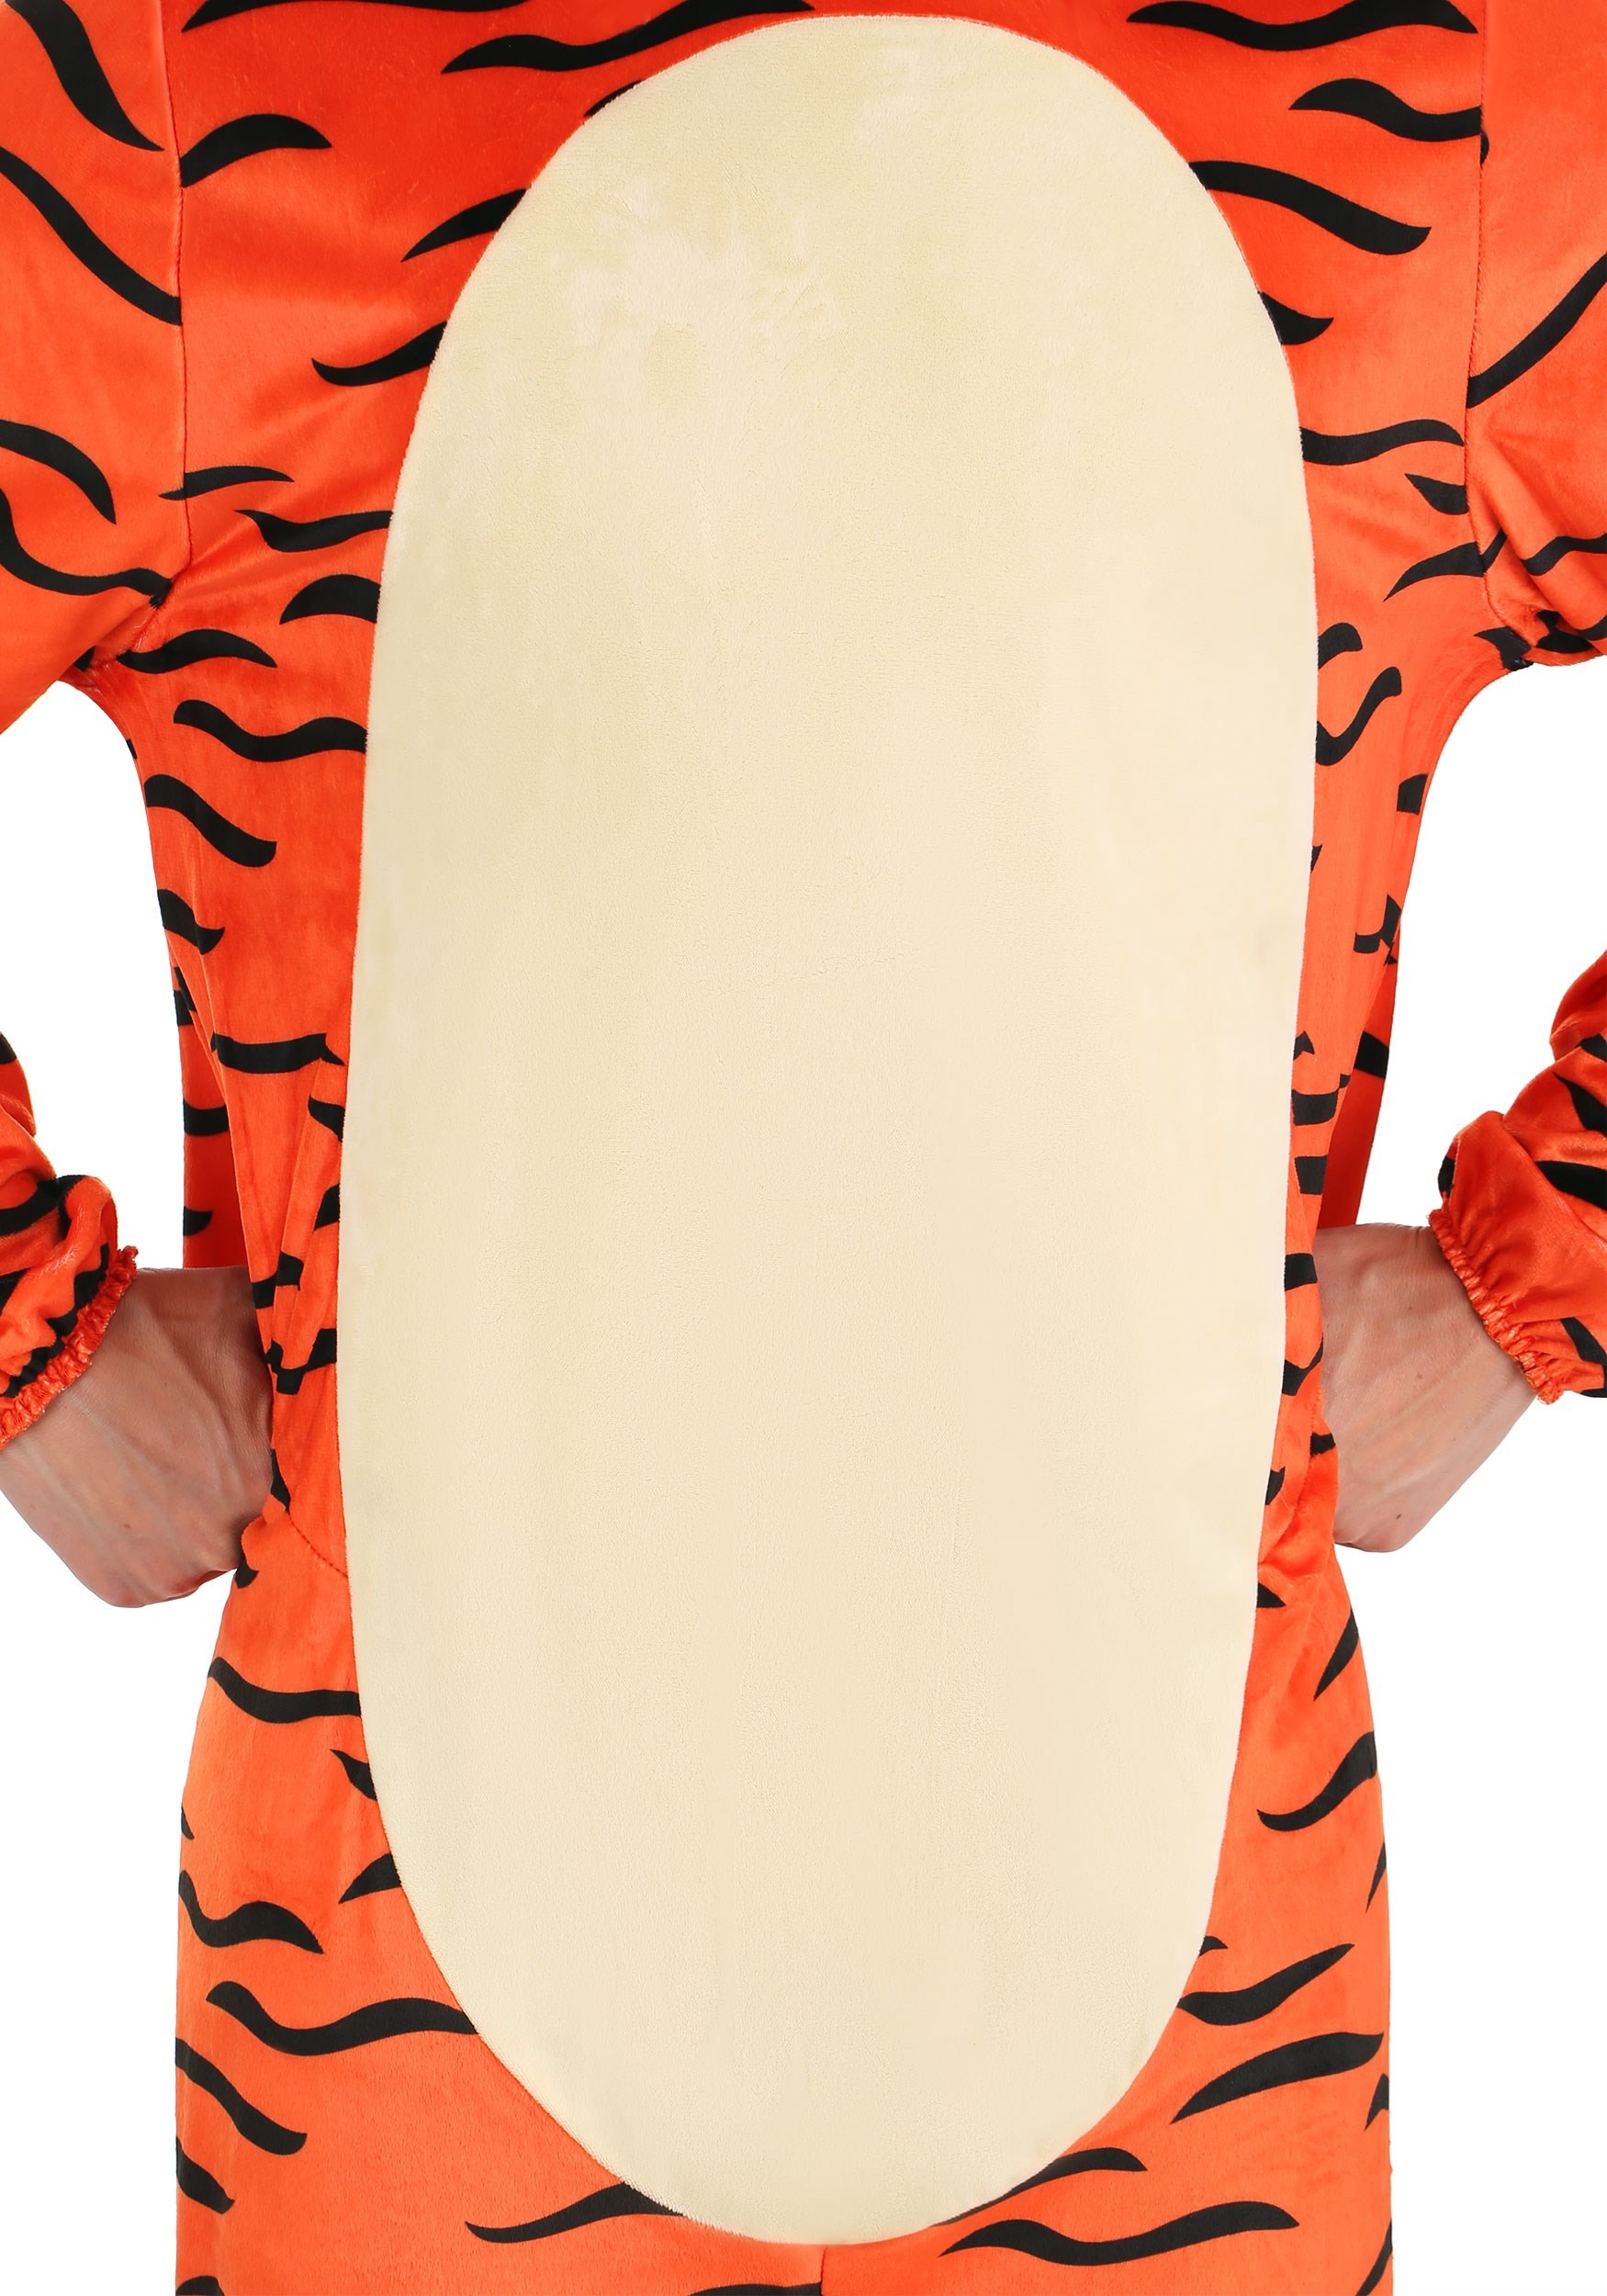 Winnie The Pooh Adult Tigger Deluxe Costume